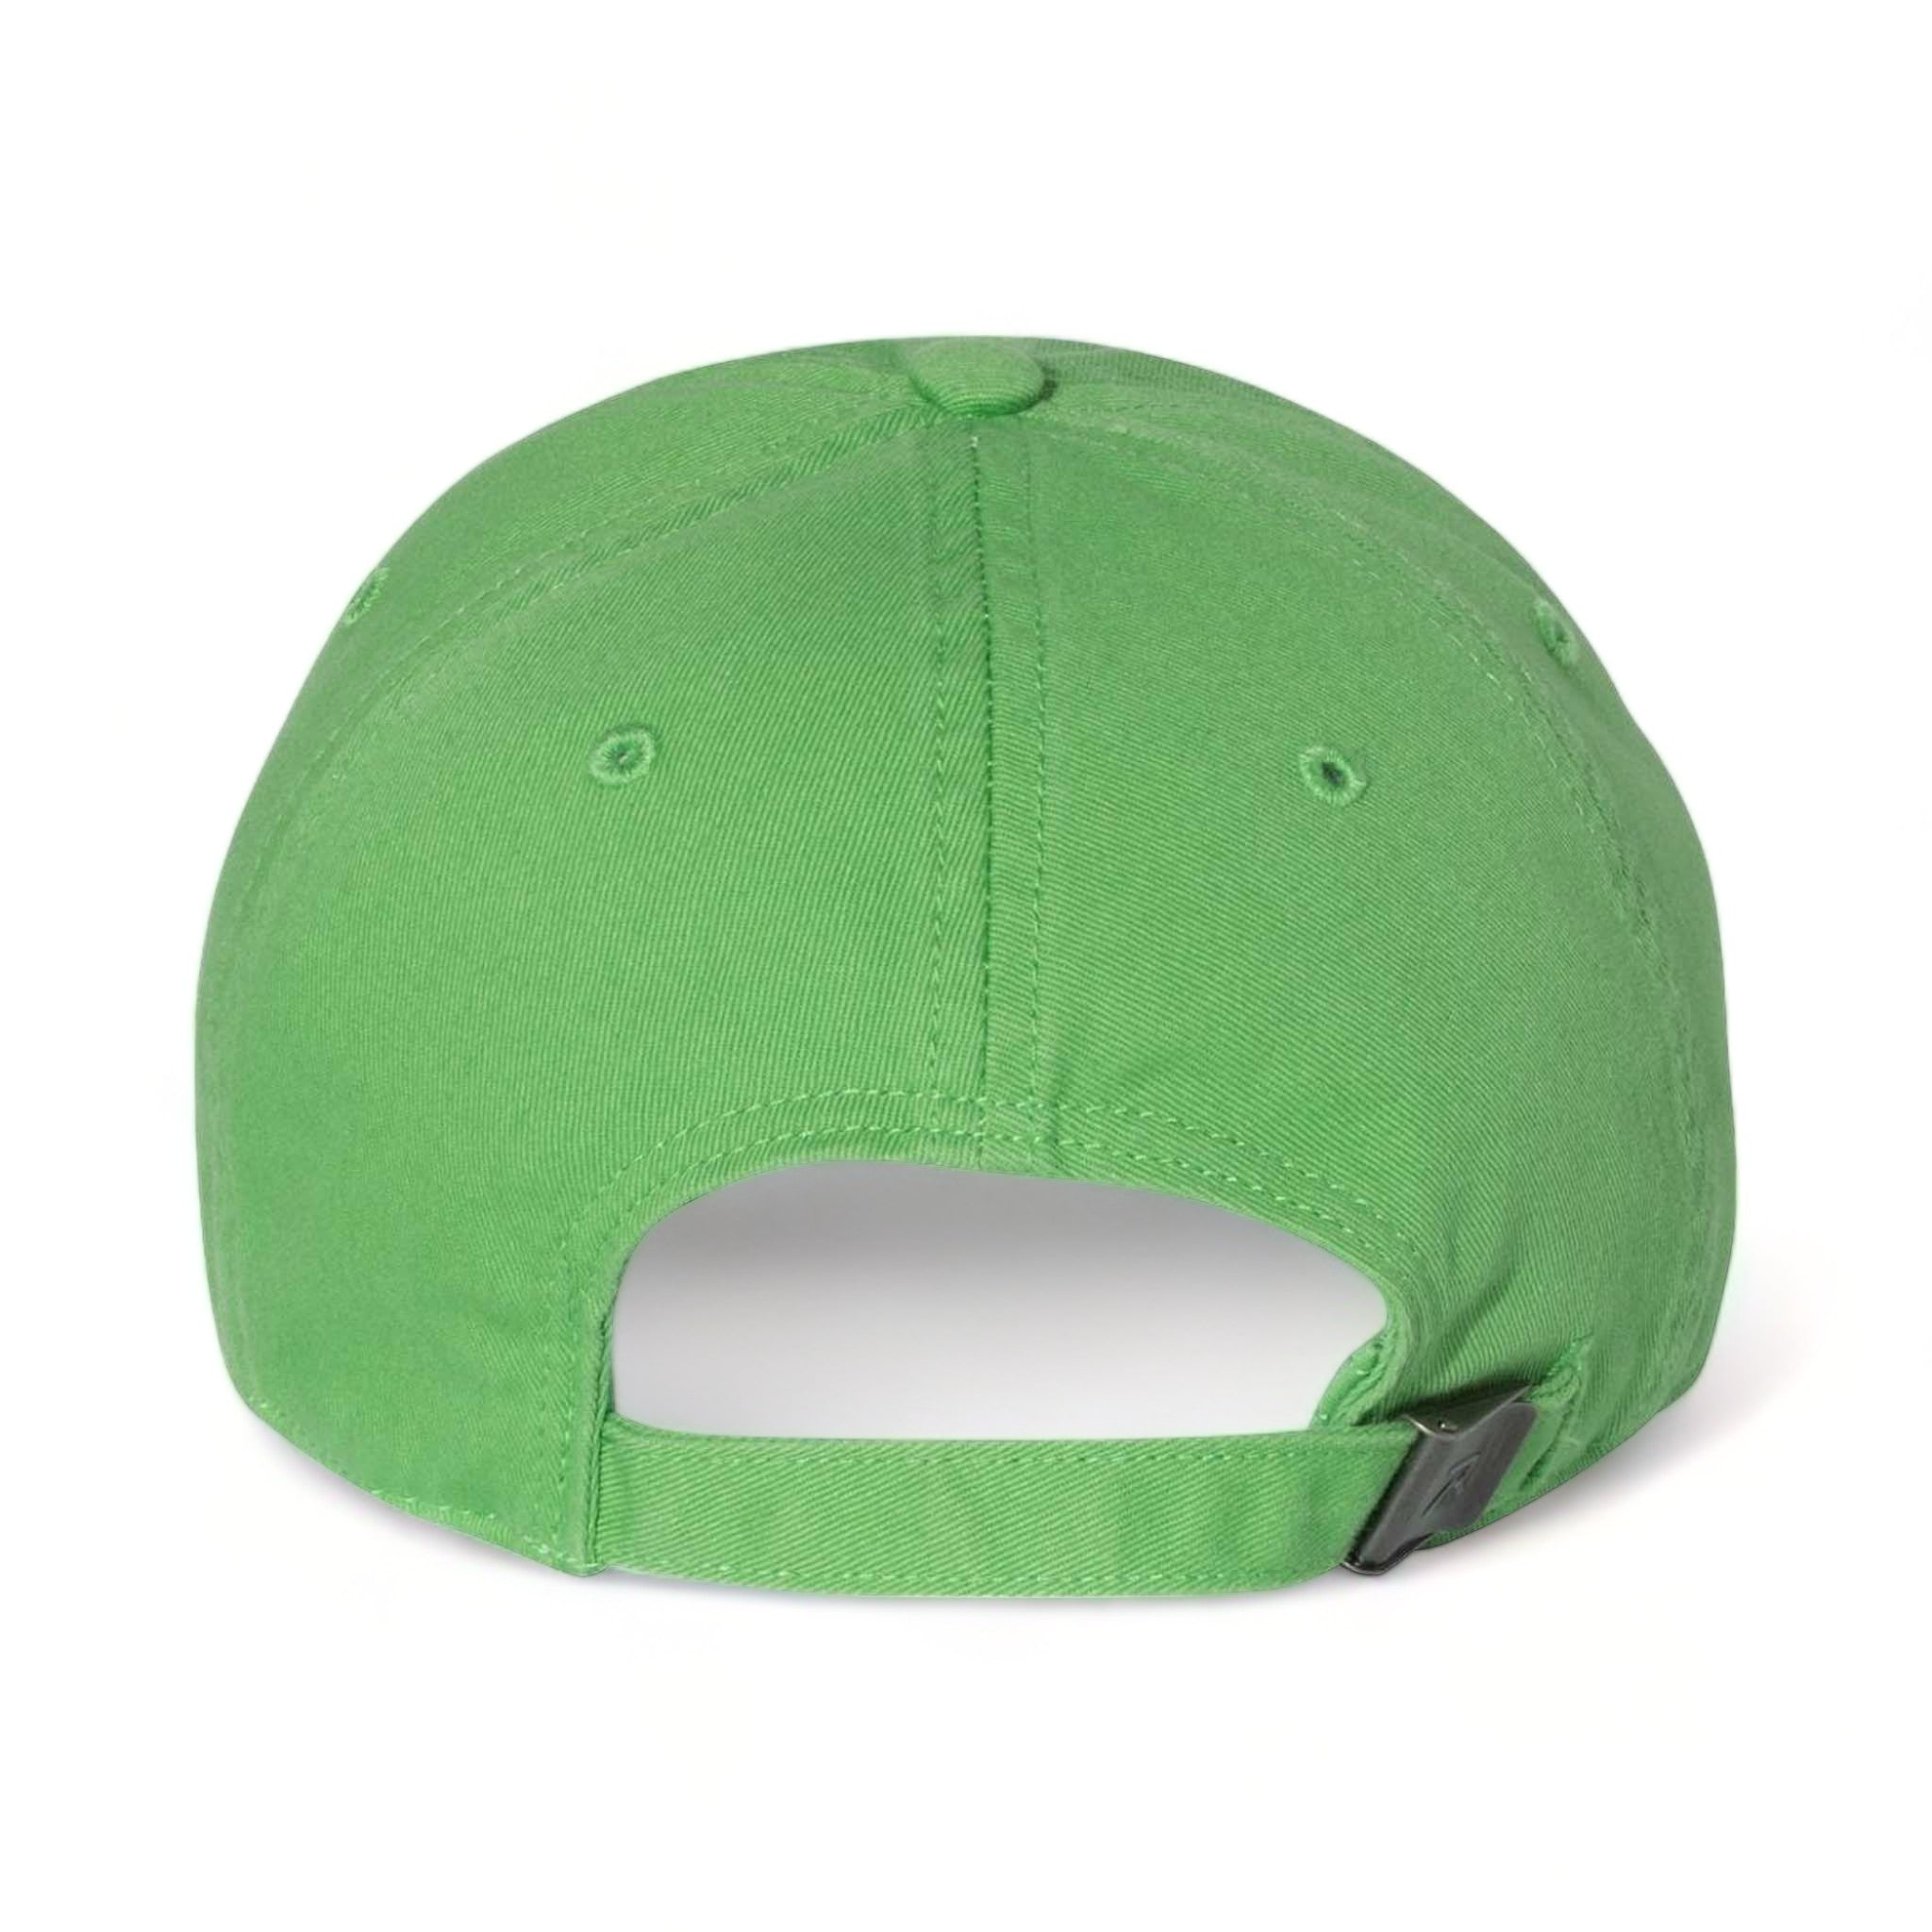 Back view of Richardson 320 custom hat in lime